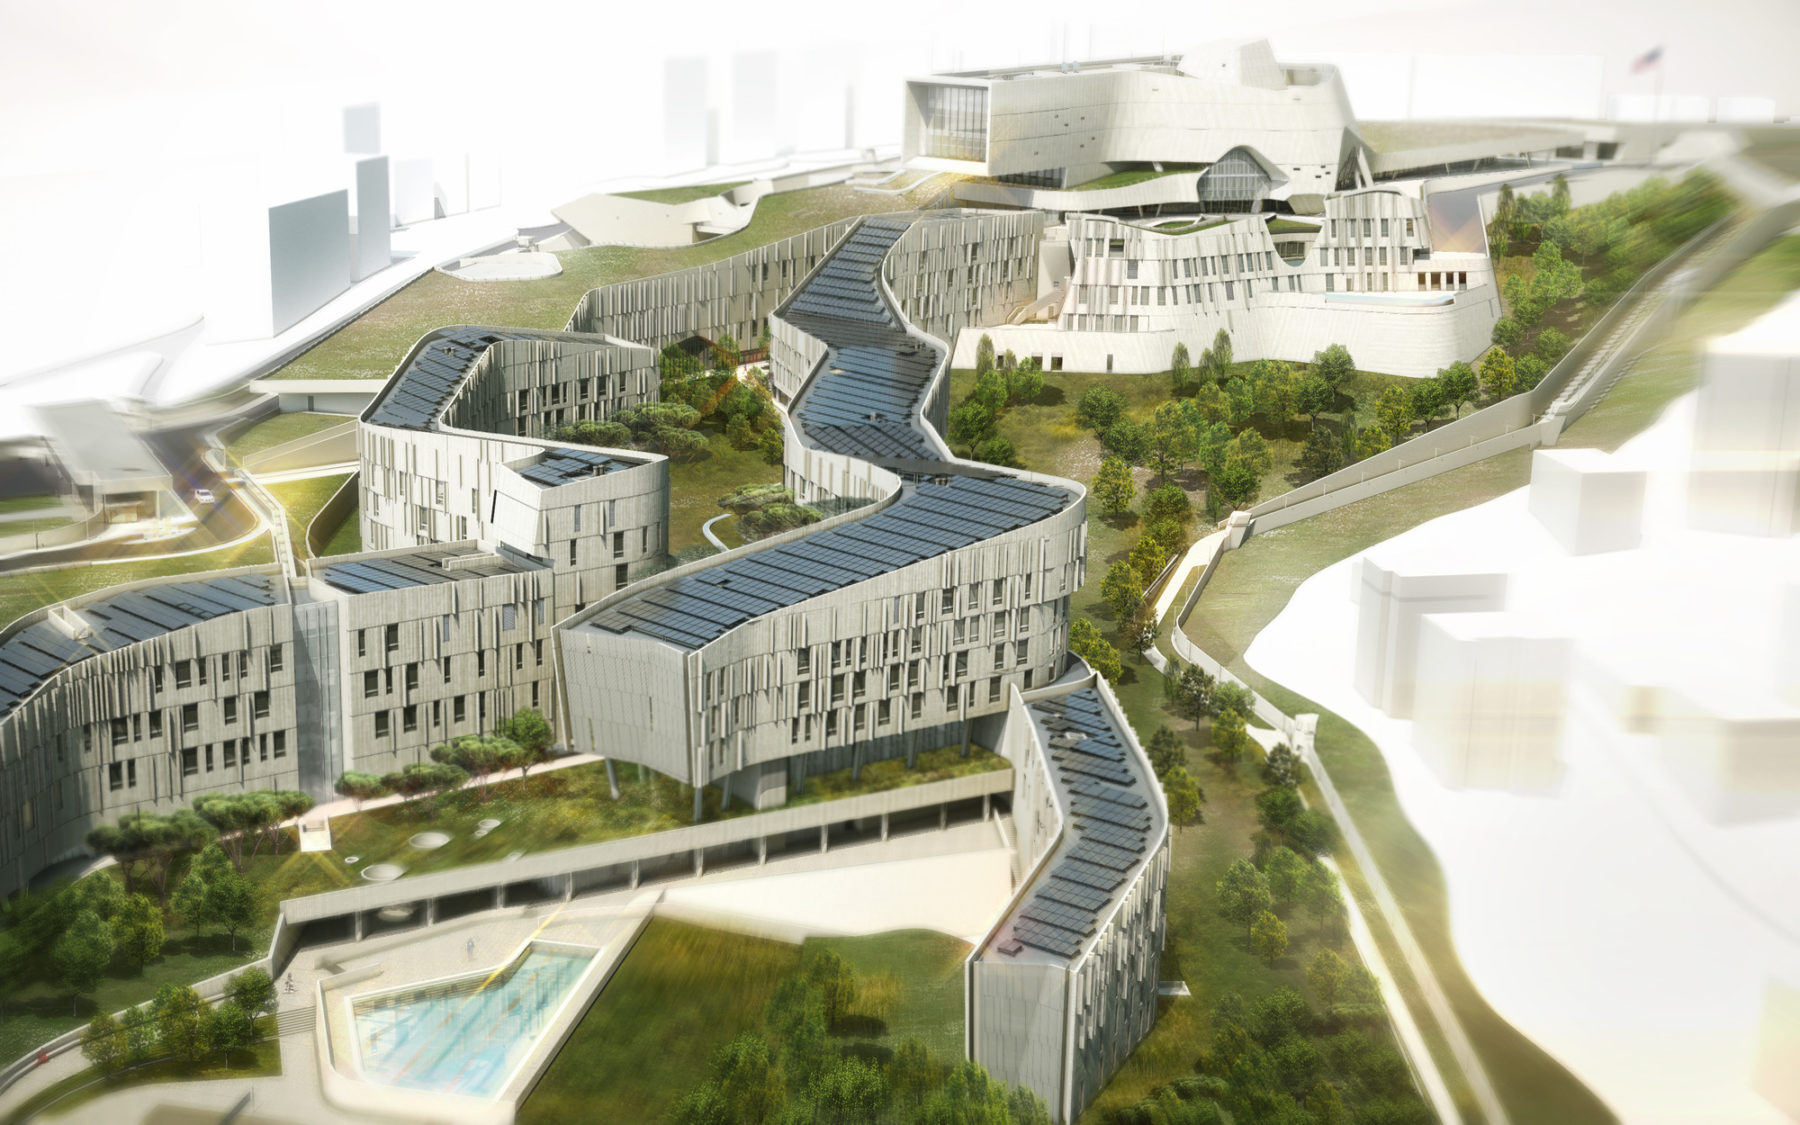 Render of the US Embassy, Beirut, with three narrow buildings surrounded by large green space and trees.